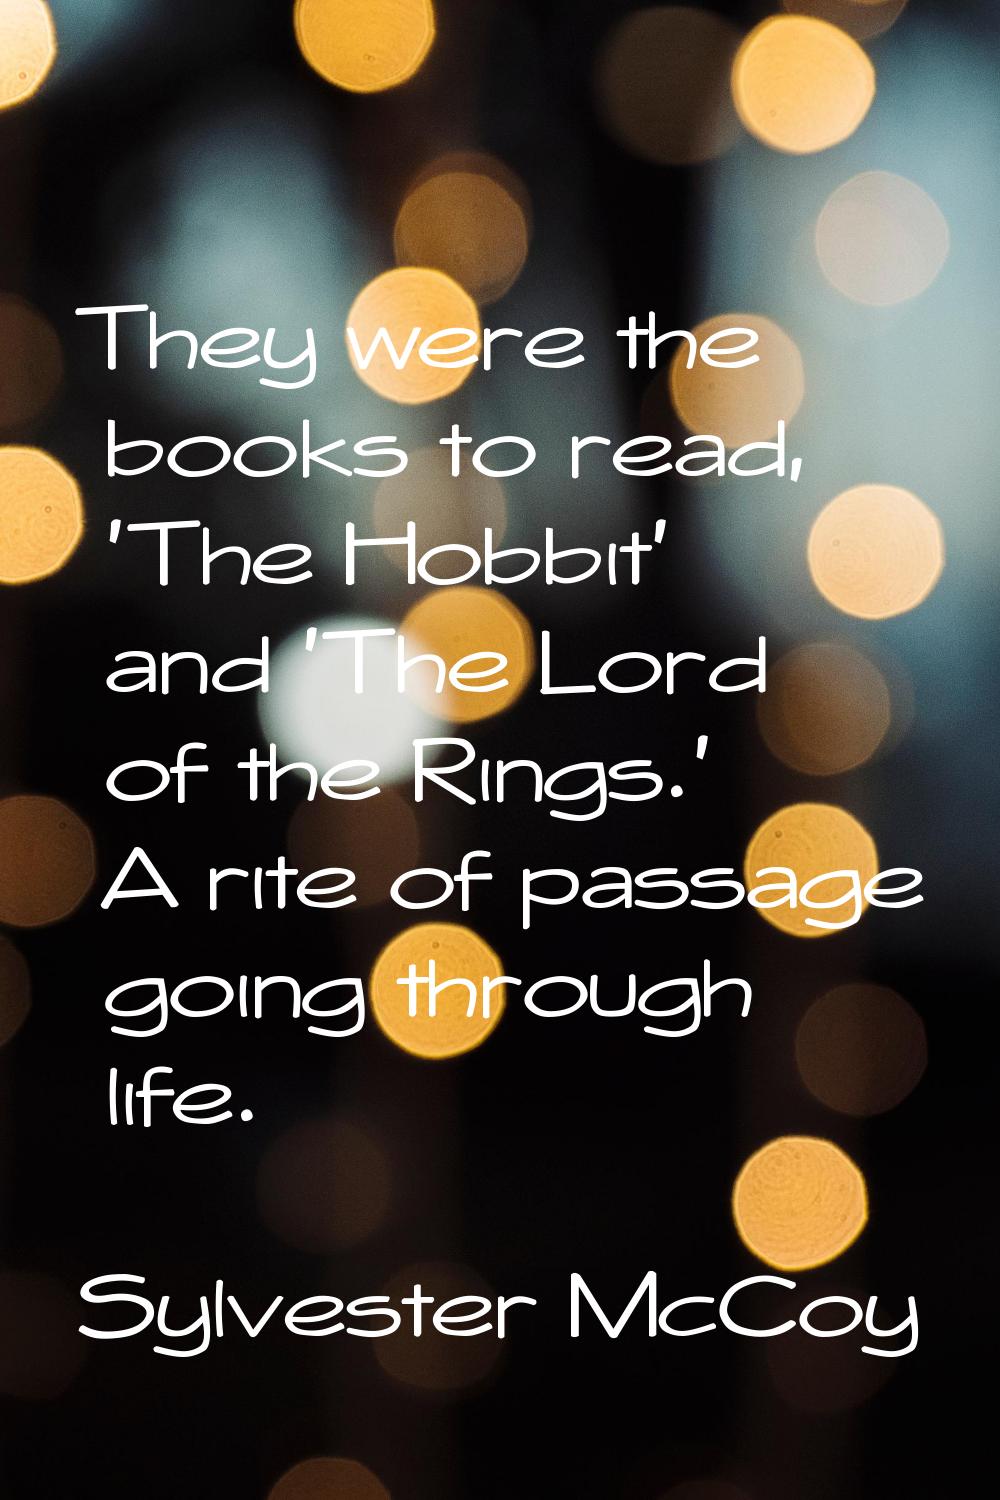 They were the books to read, 'The Hobbit' and 'The Lord of the Rings.' A rite of passage going thro